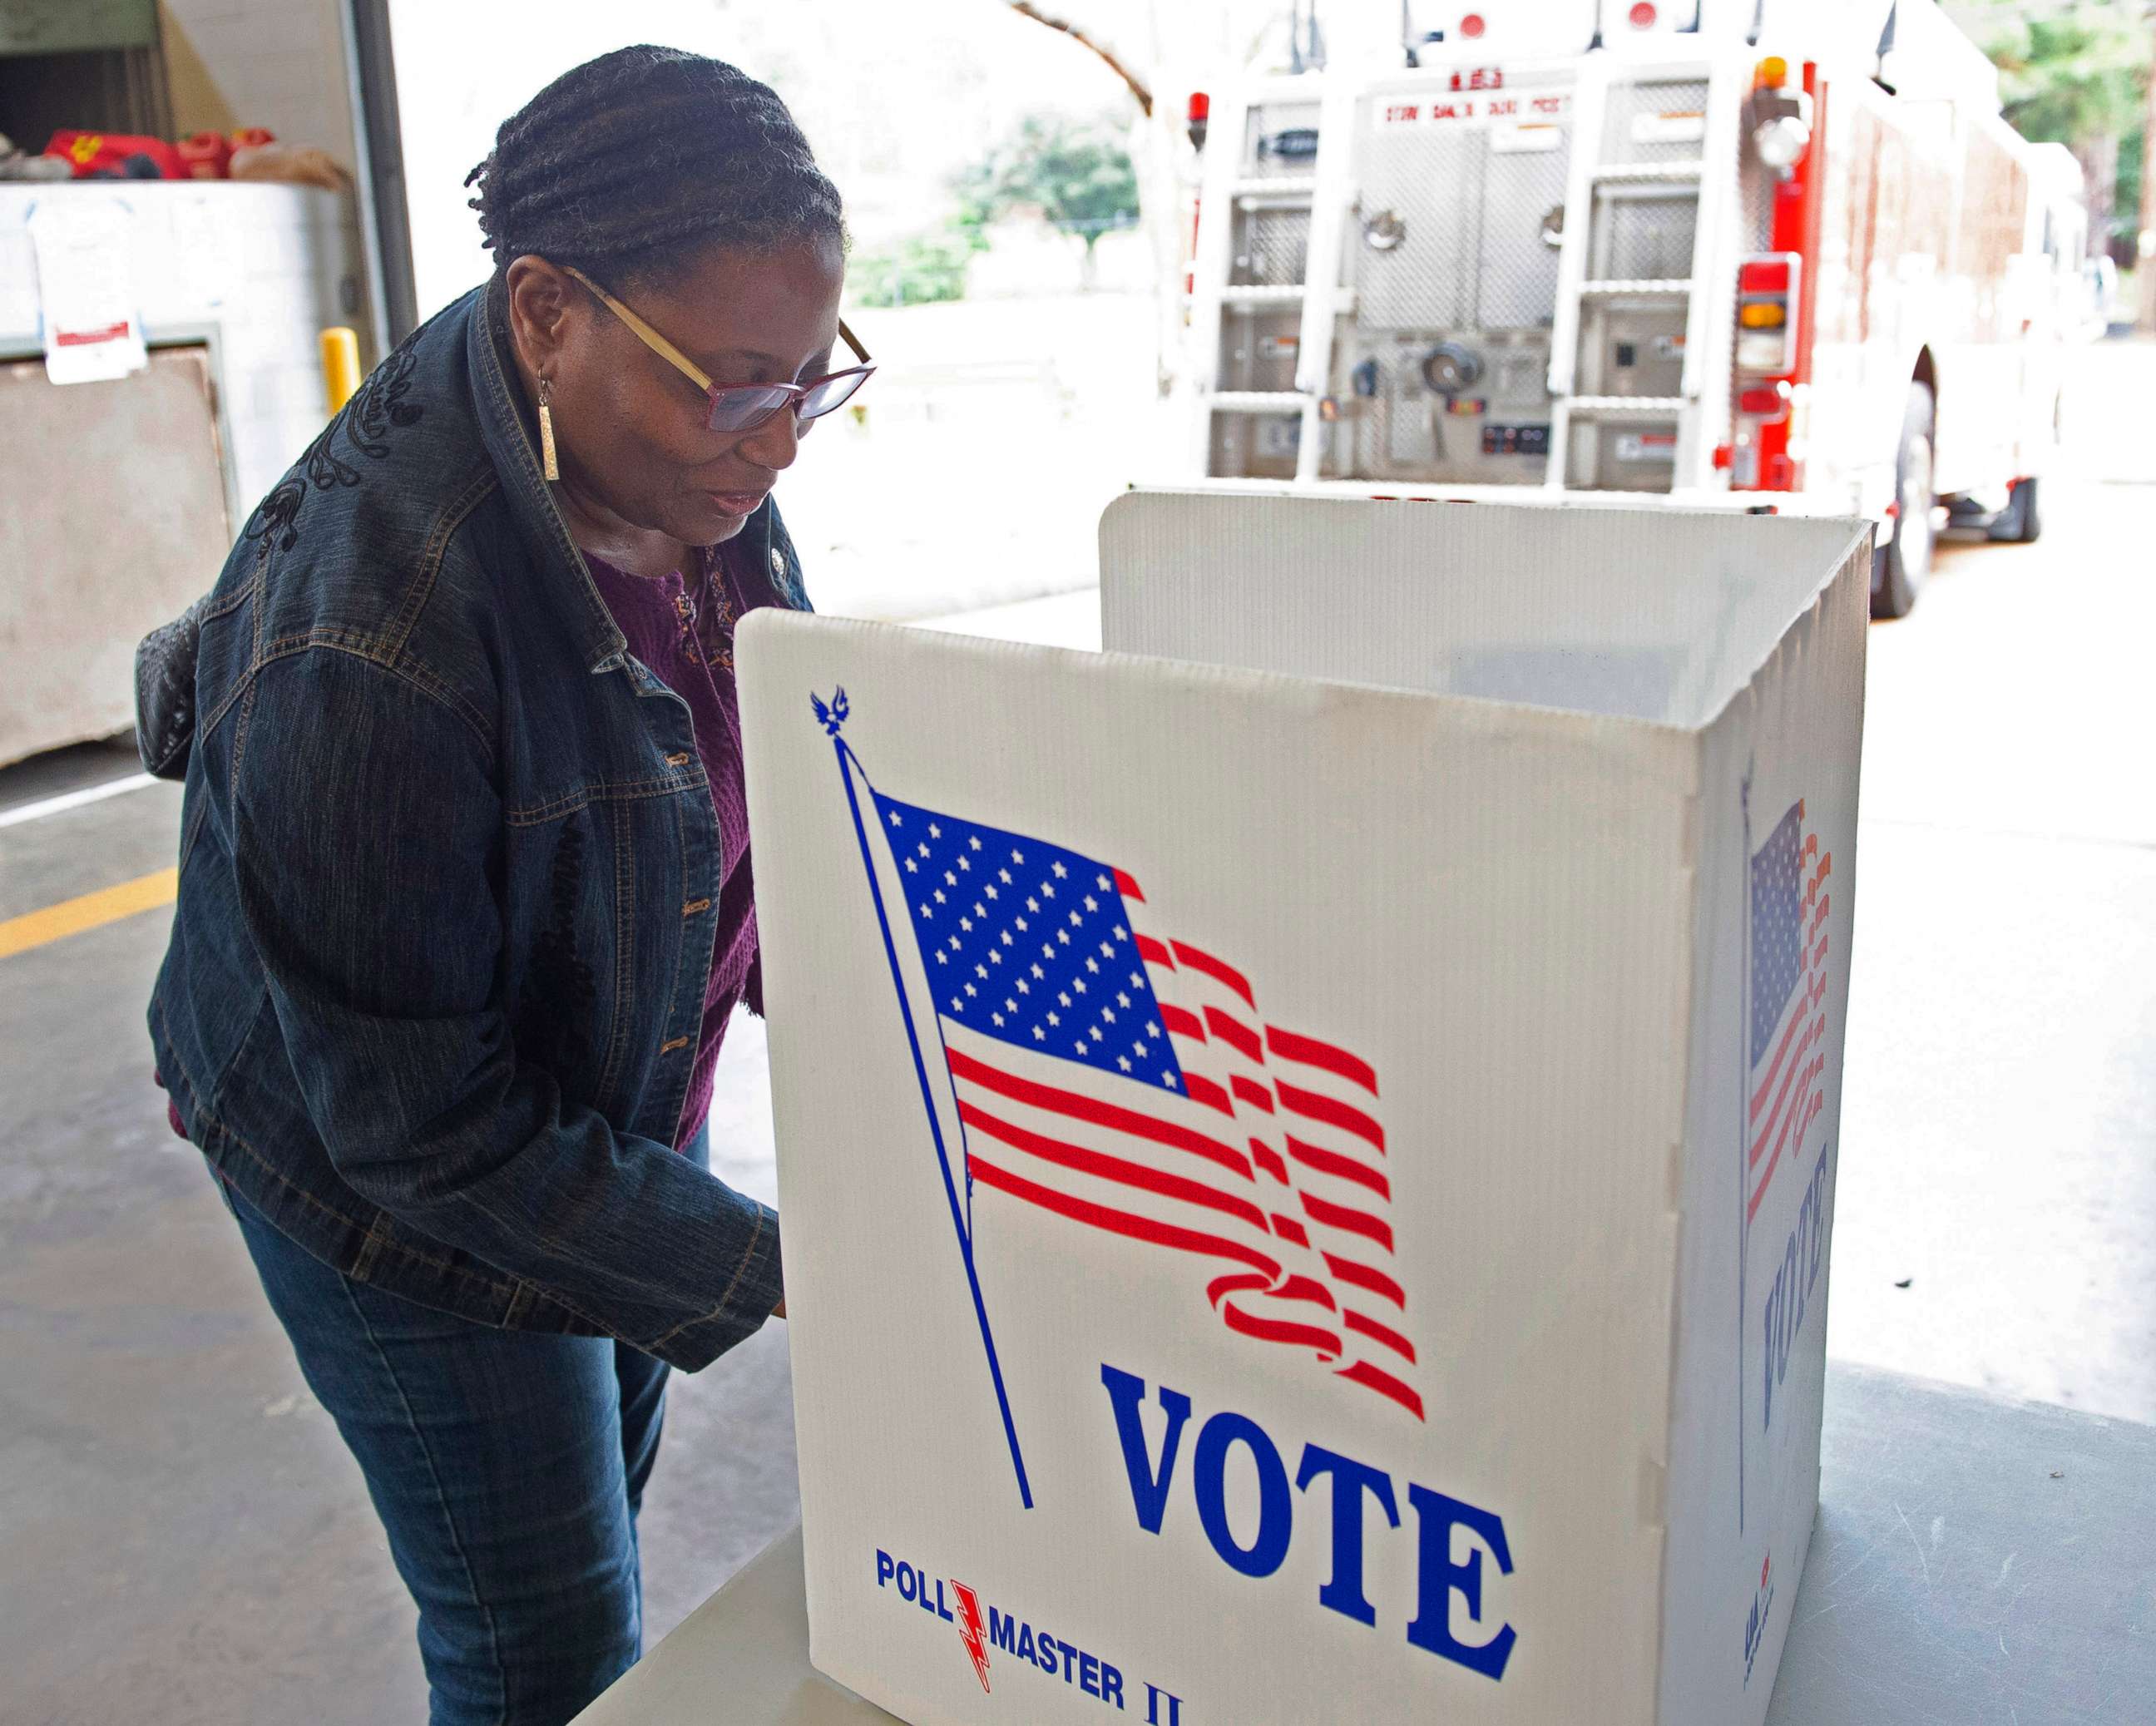 PHOTO: Pamela Shaw casts her vote in the primary election at a polling location in Jackson, Miss, Mar 10, 2020.